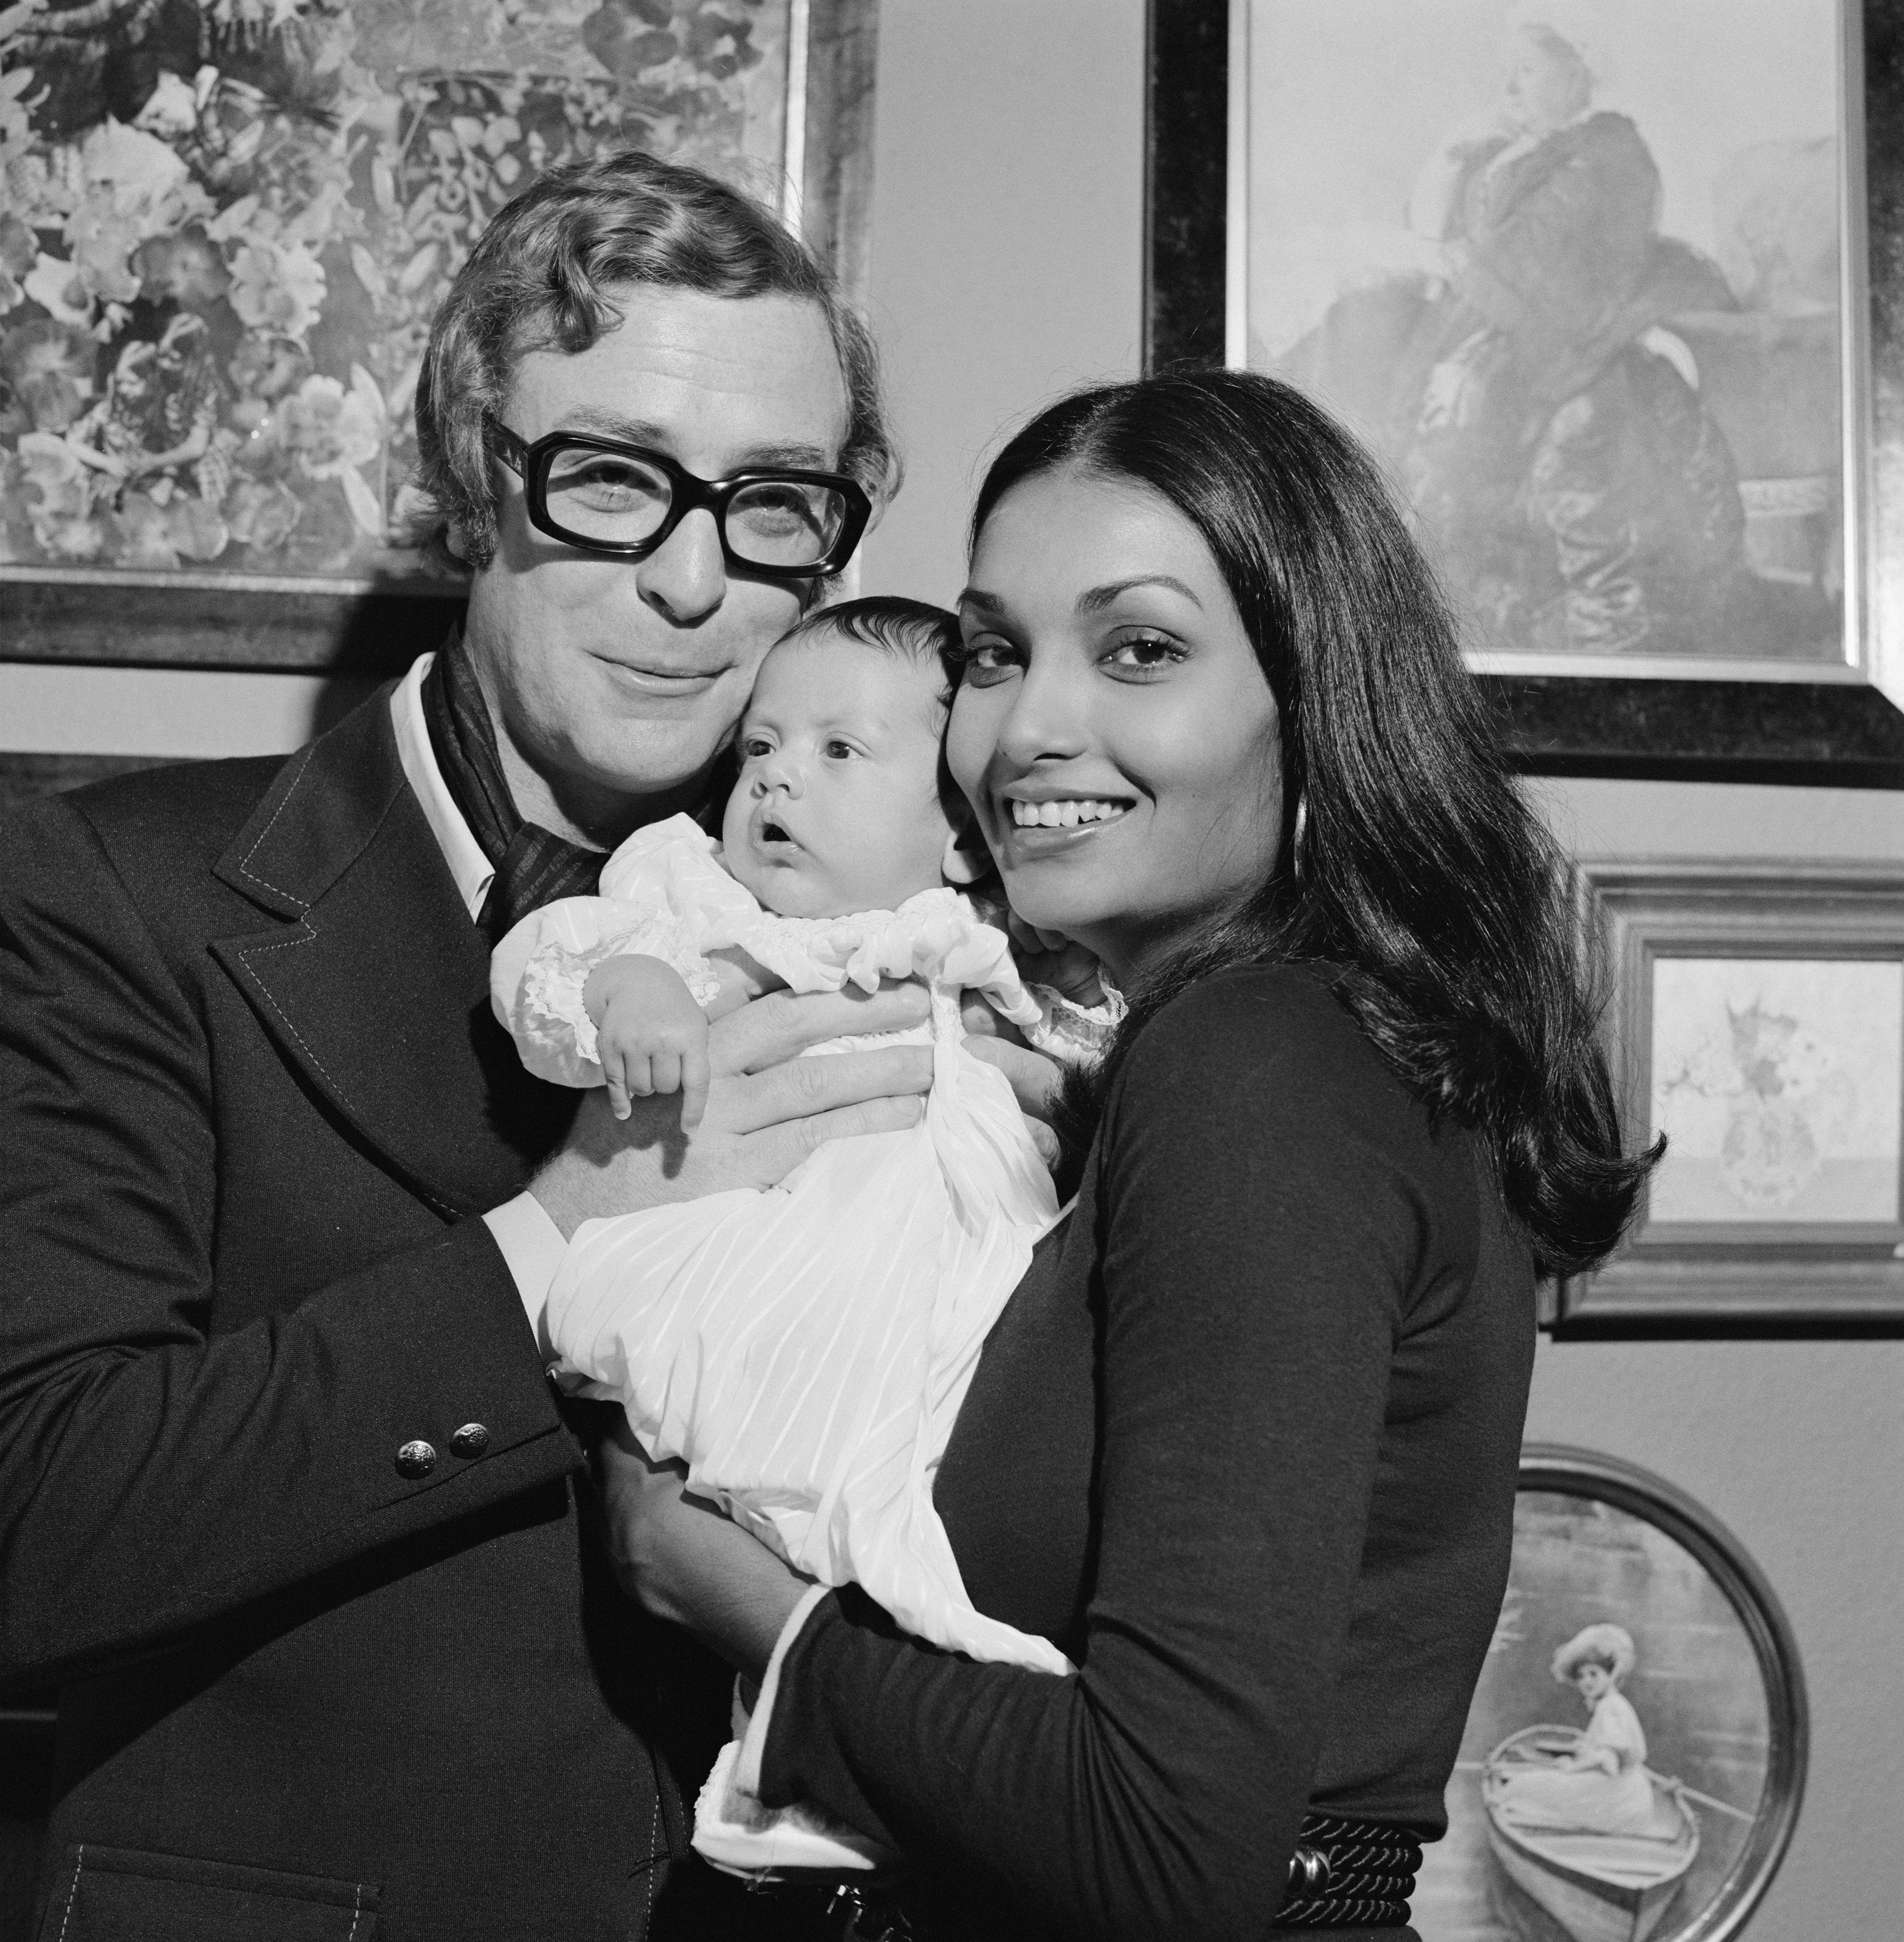 Michael Caine and his family, wife Shakira and daughter Natasha on 25th September 1973. | Source: Getty Images